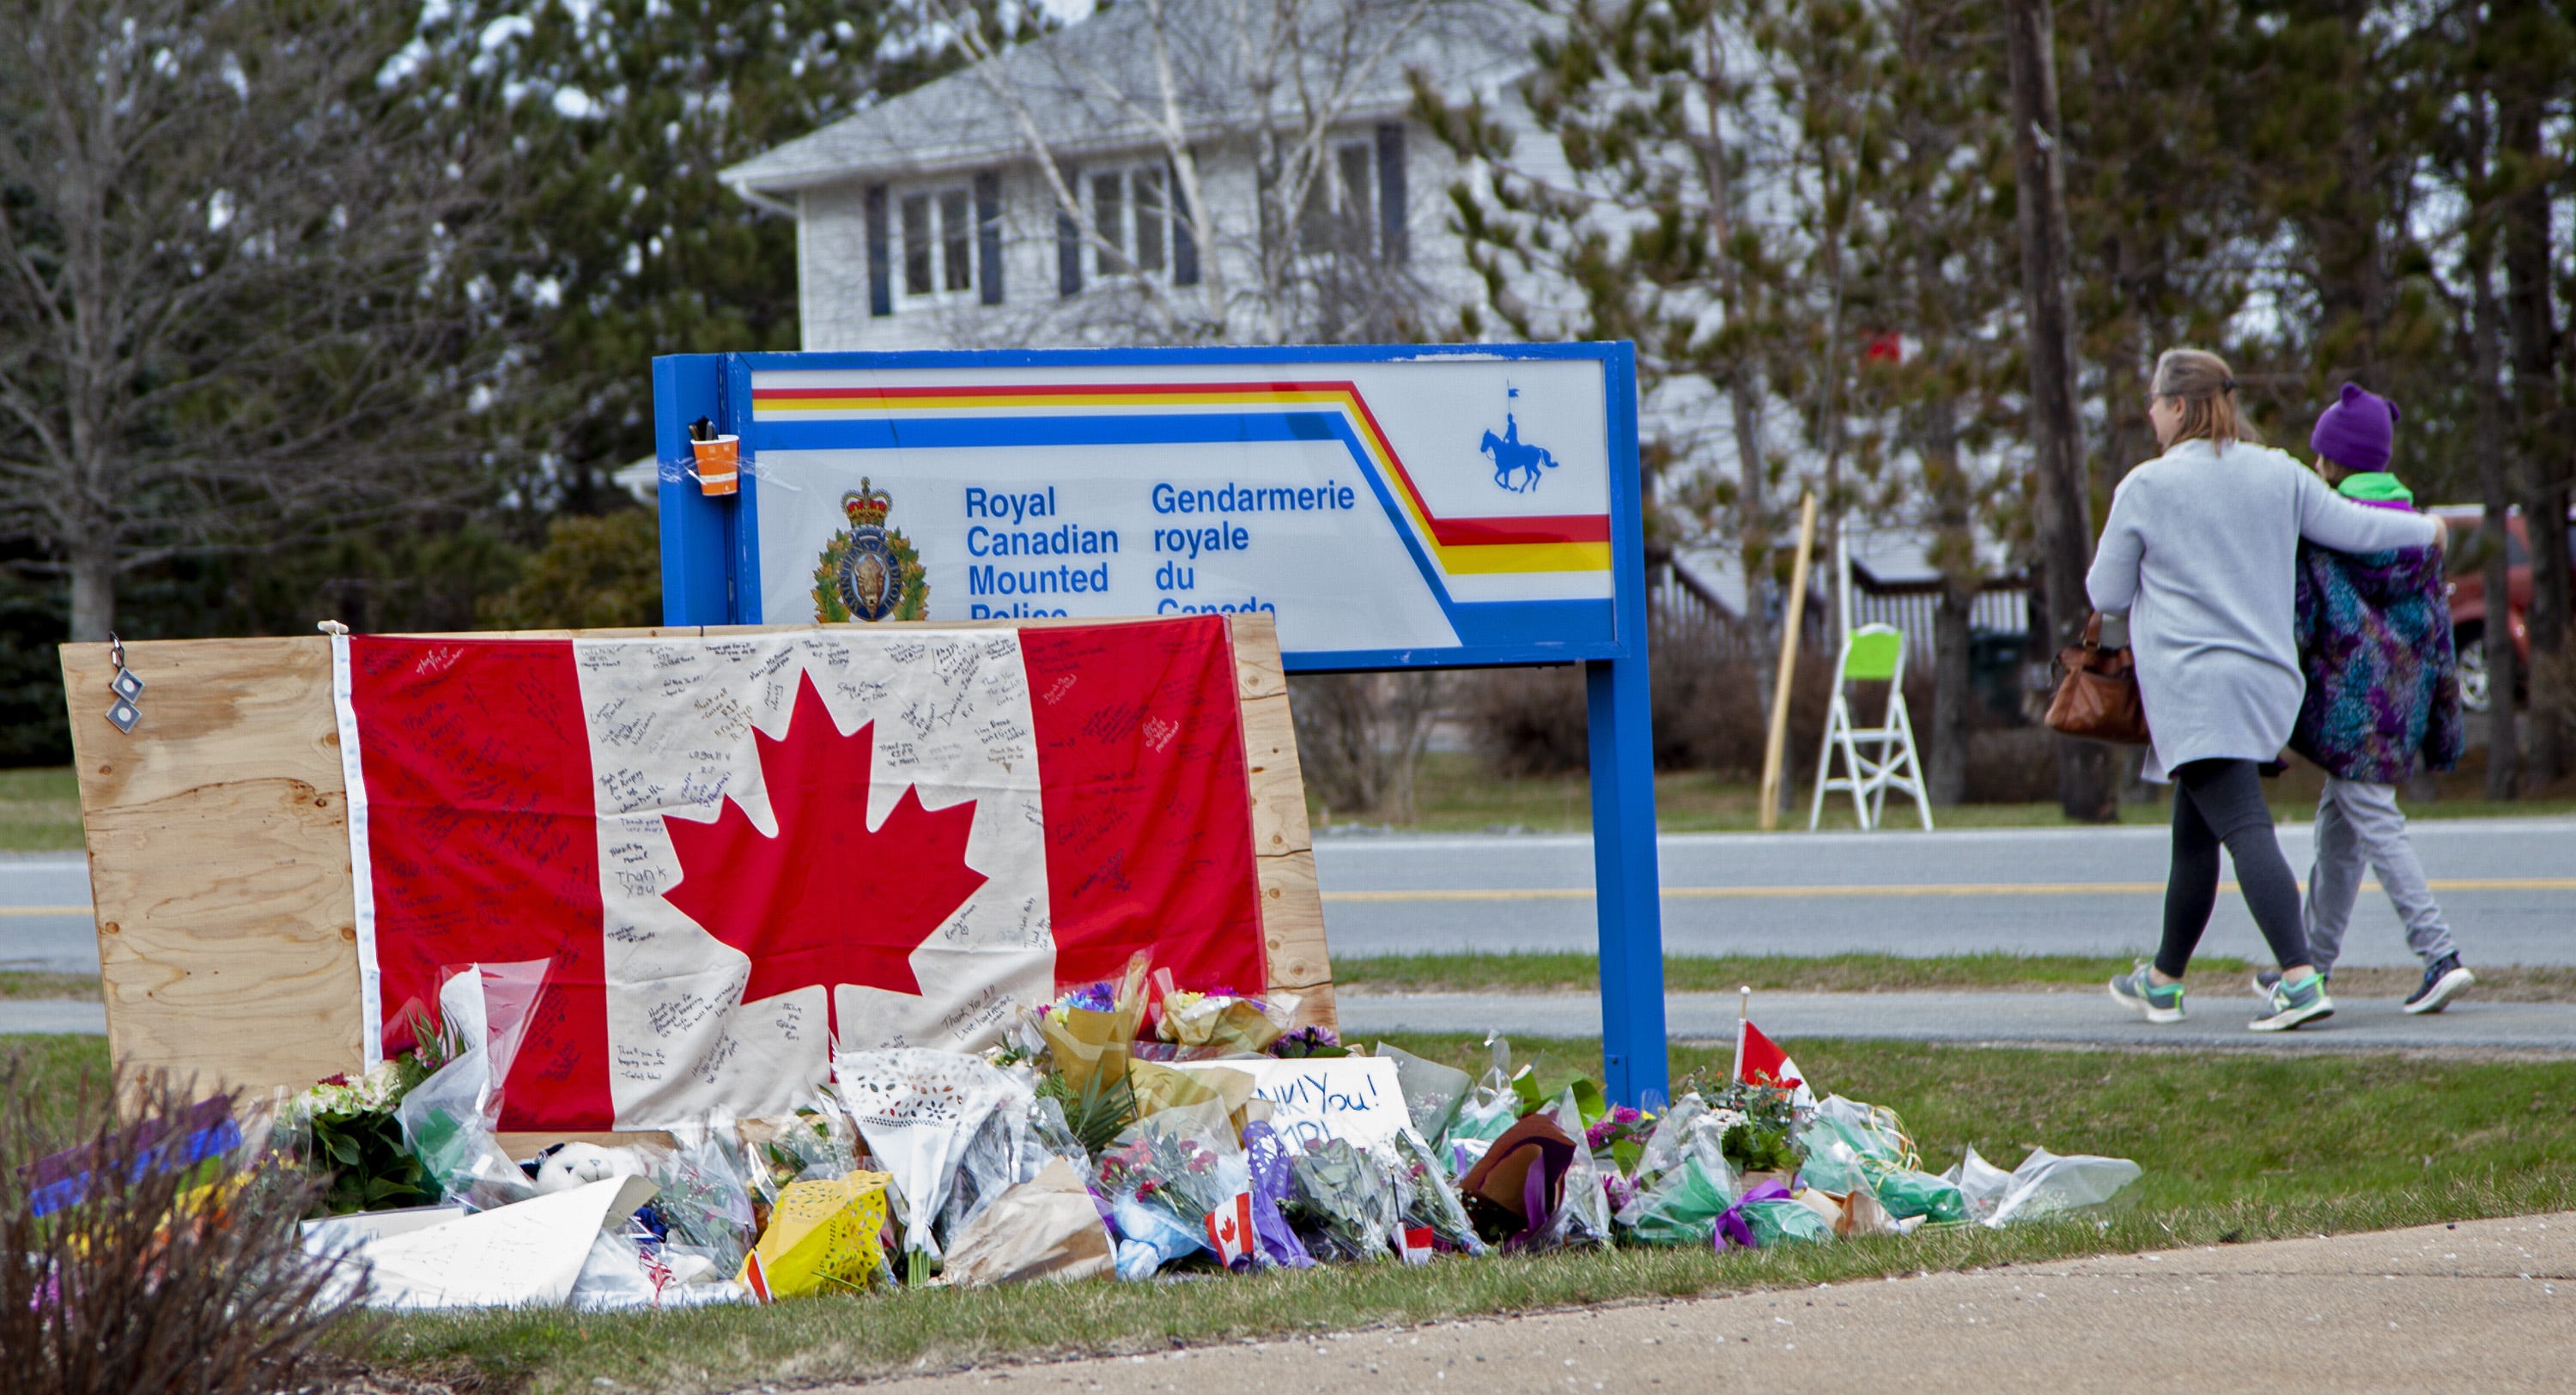 Nova Scotia gunman carried out mass shooting after argument with girlfriend: official